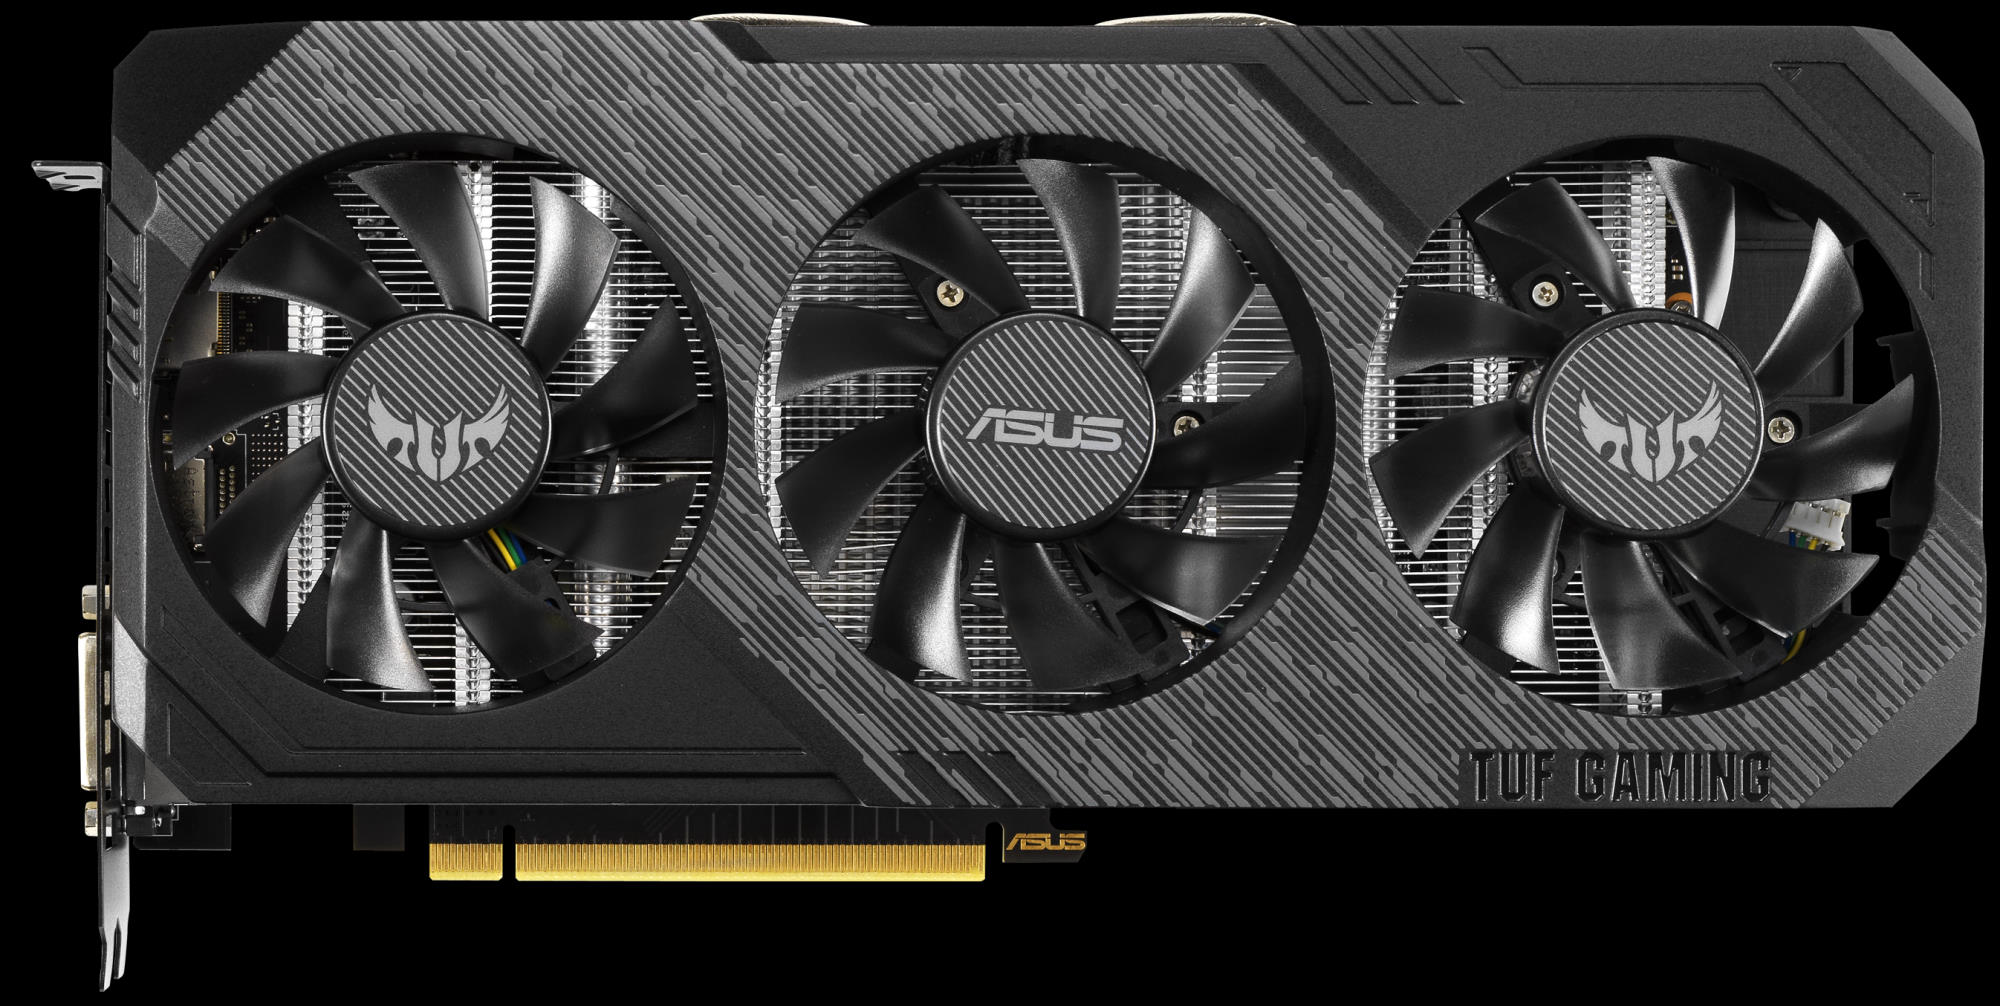 GTX 1660 SUPER and GTX 1650 SUPER graphics cards from ROG and ASUS power up  Full HD gaming